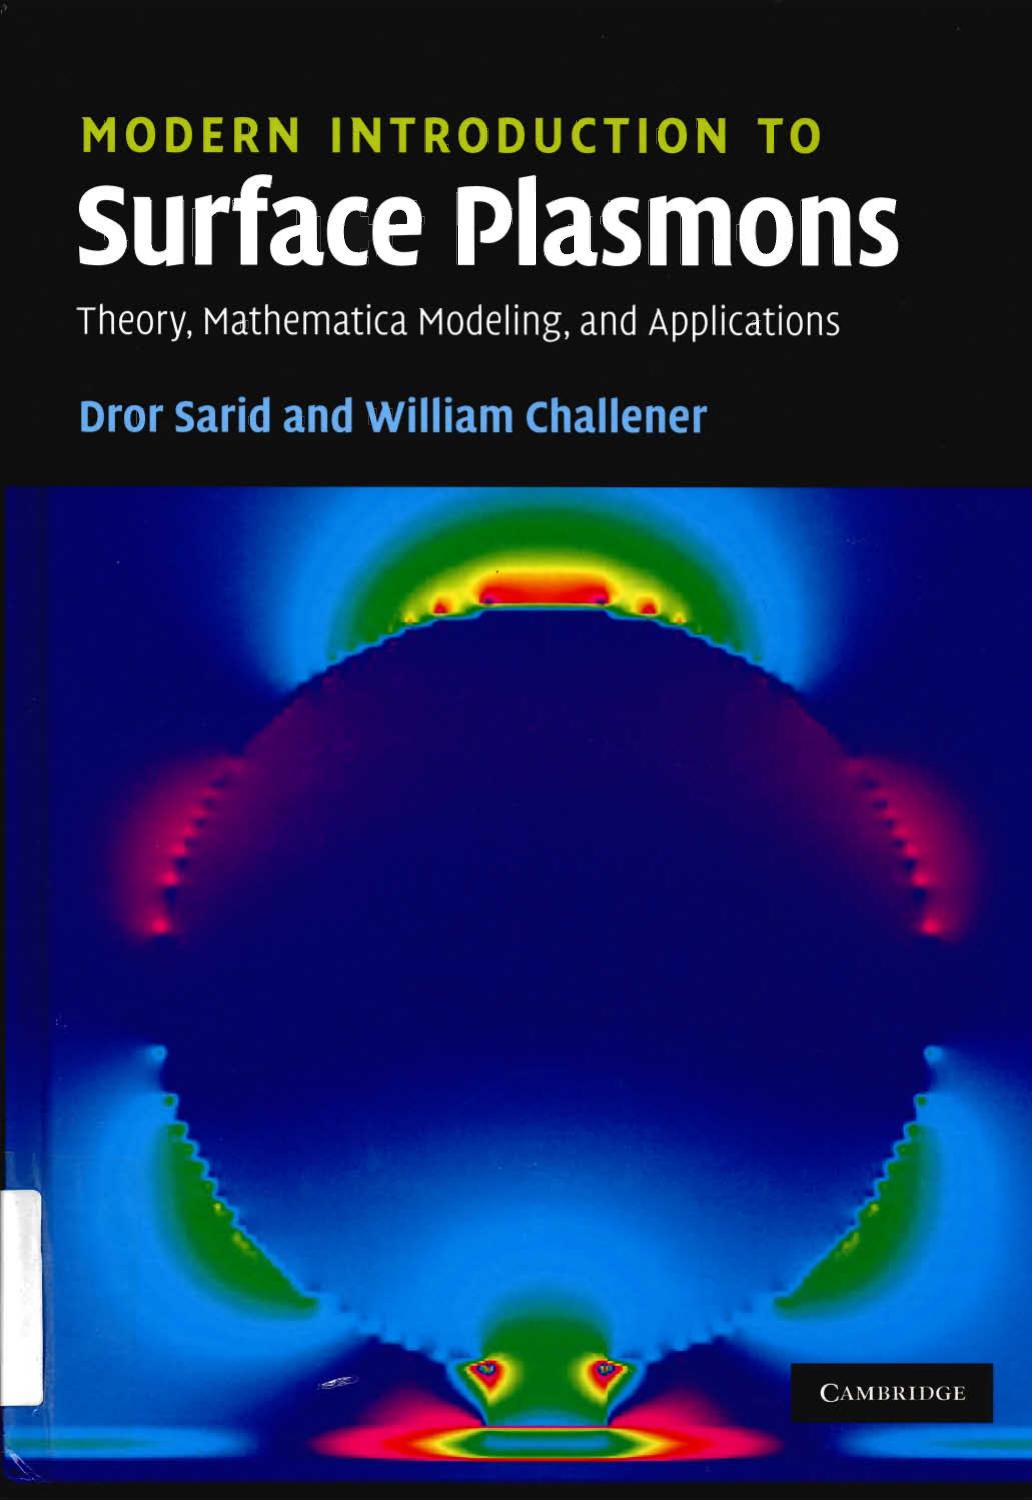 Modern Introduction to Surface Plasmons: Theory, Mathematica® Modeling, and Applications